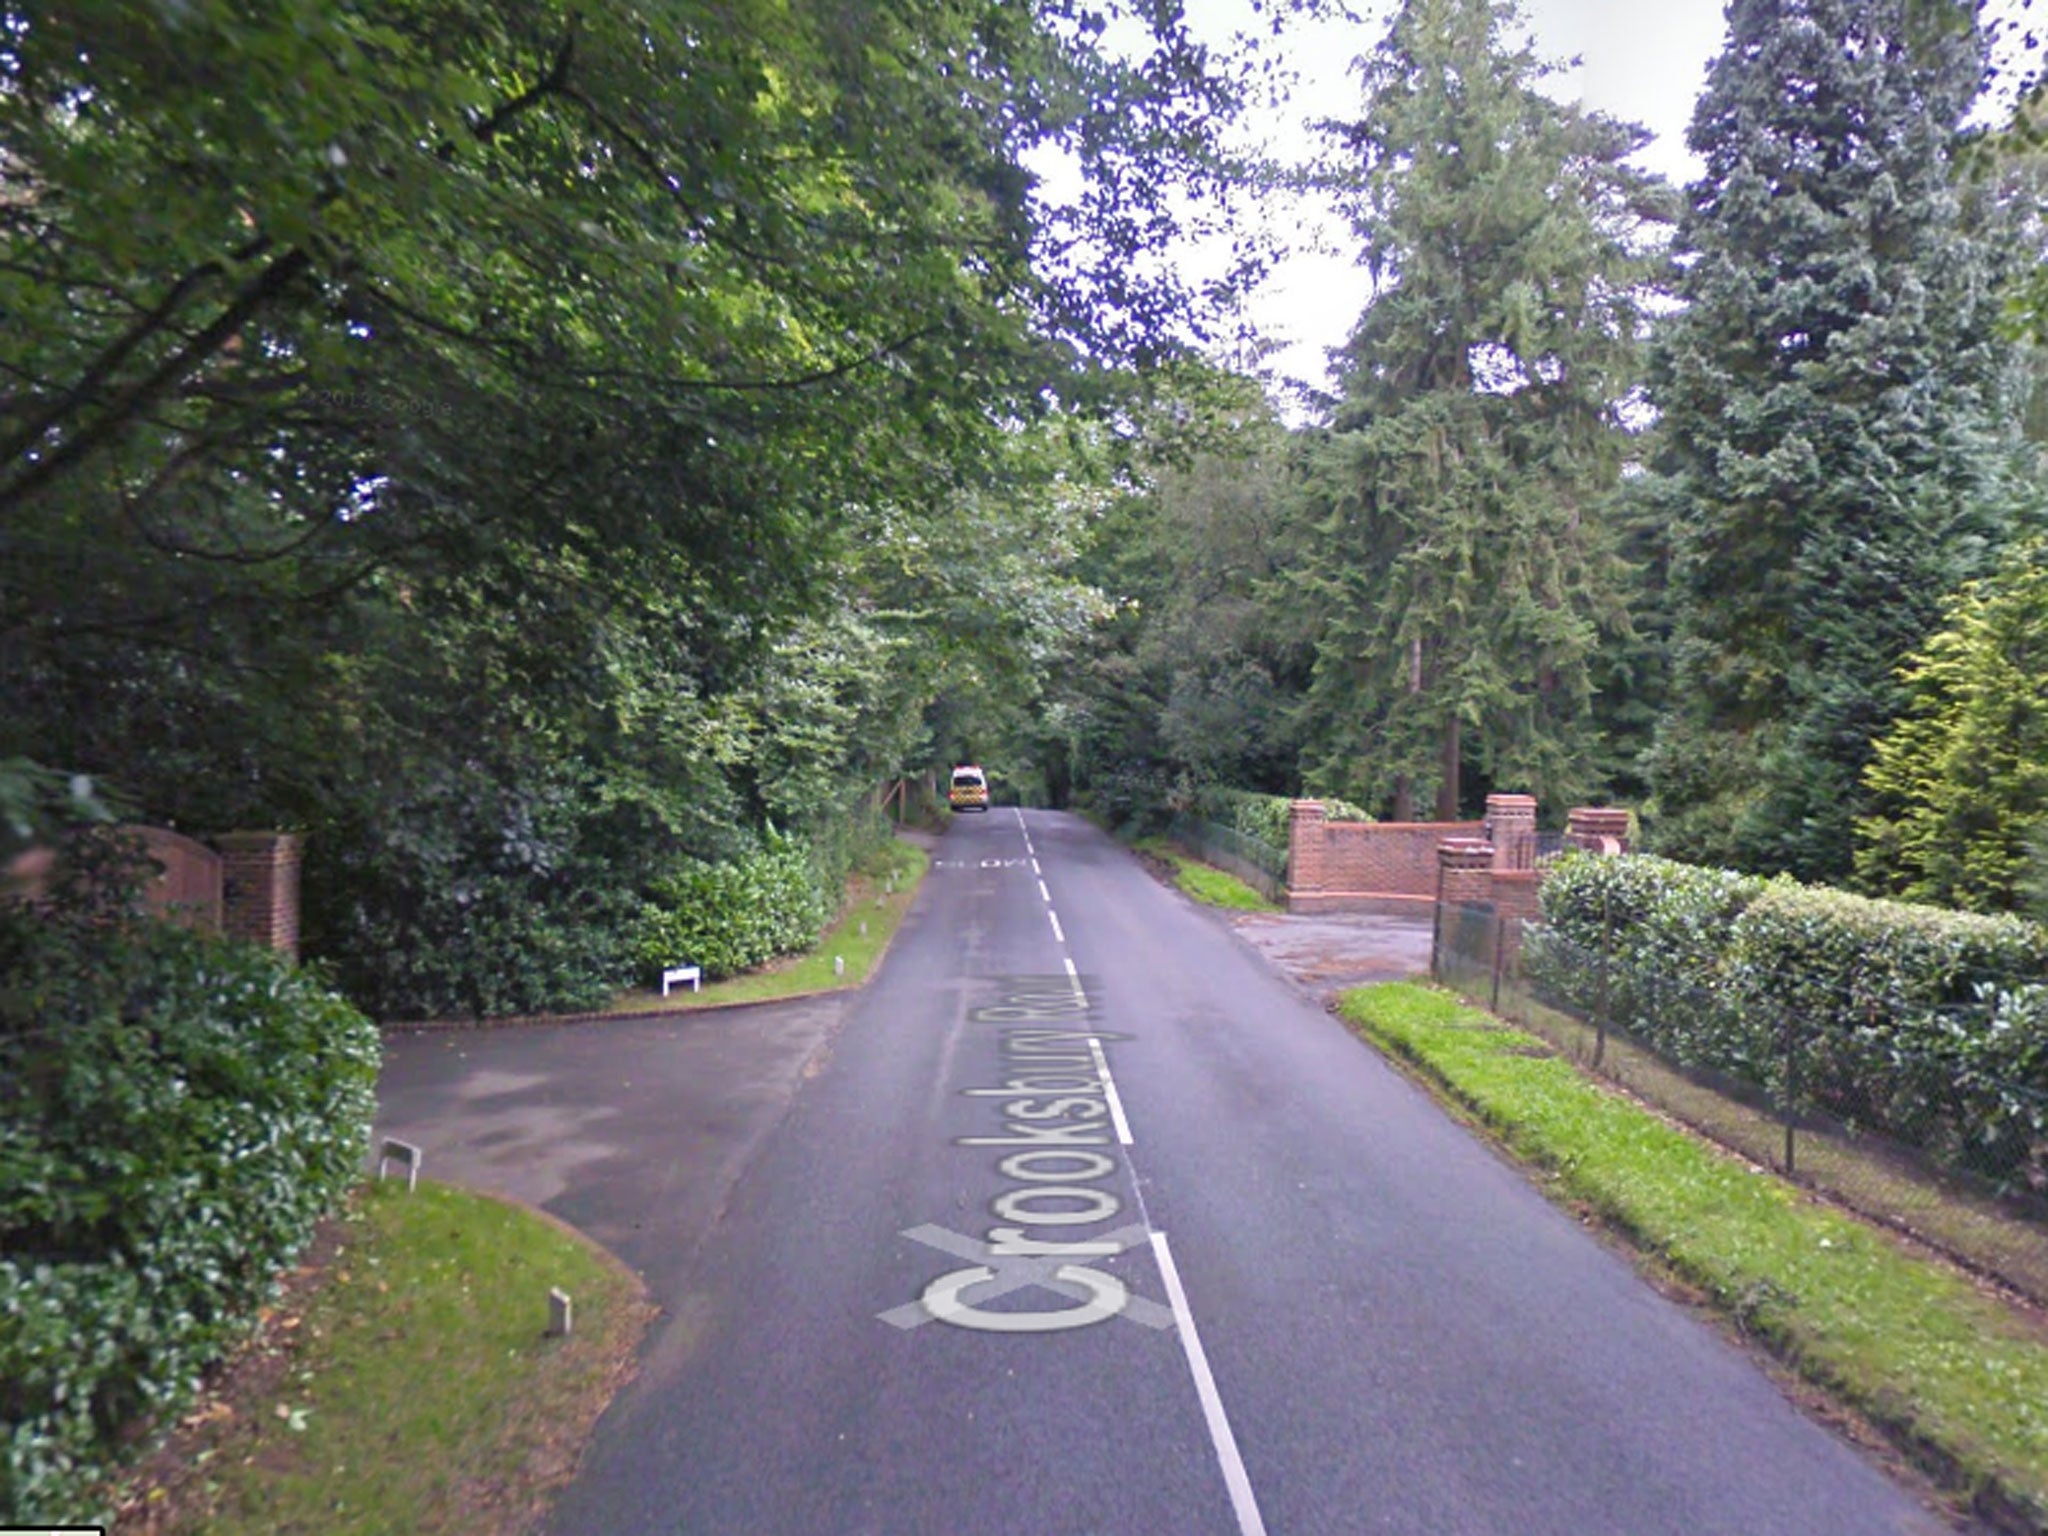 The bodies of two women were found at an address off Crooksbury Road in the village of Farnham on Sunday